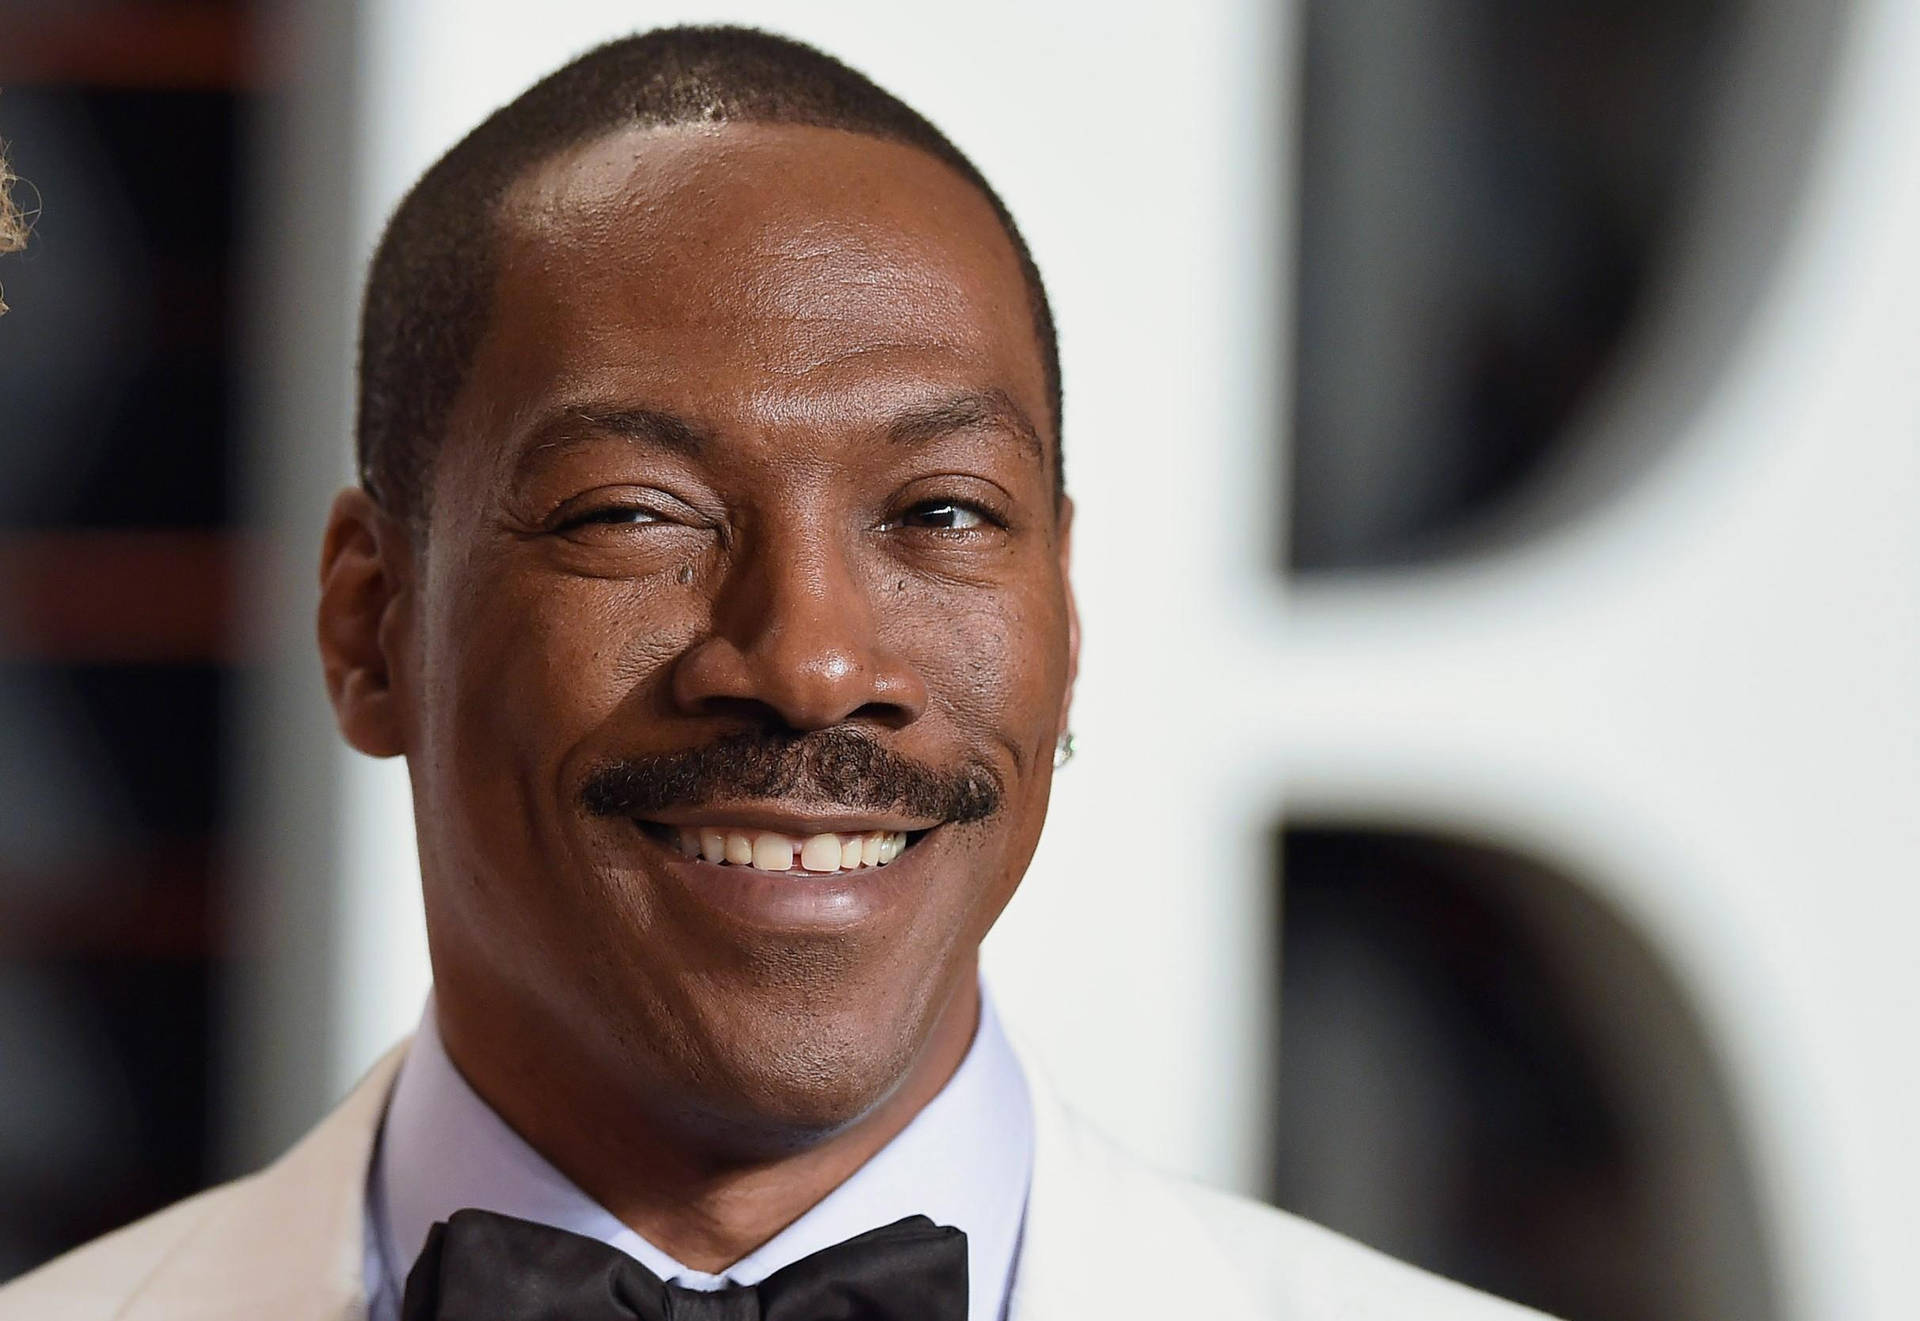 Eddiemurphy Emmys 2020 Would Translate To Eddie Murphy På Emmys 2020 In Swedish. However, This Phrase Does Not Pertain To Computer Or Mobile Wallpaper. Could You Please Provide More Context Or Clarifications? Wallpaper